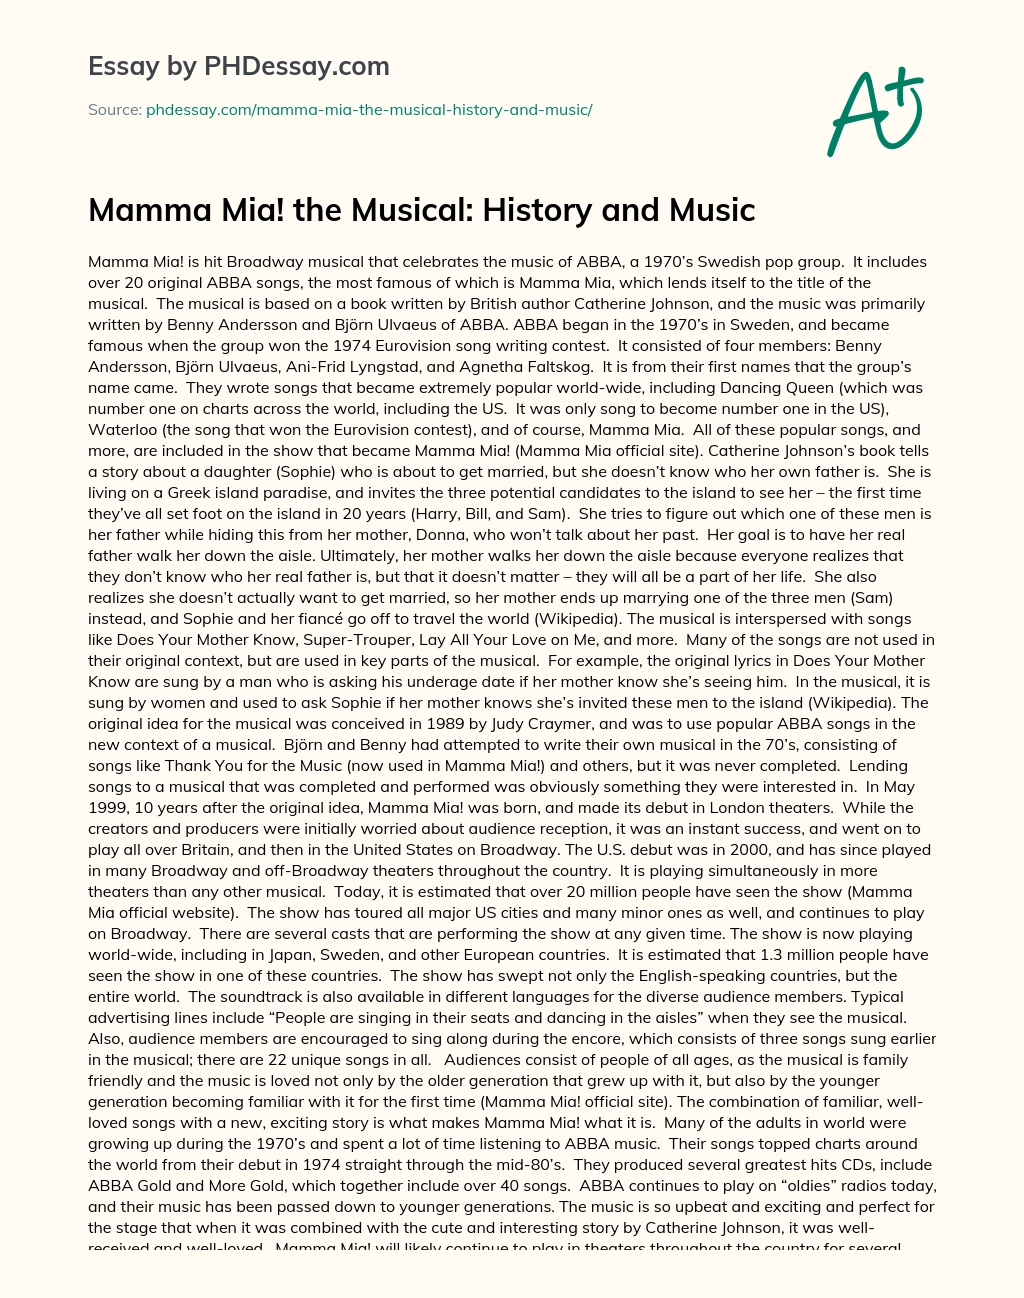 Mamma Mia! the Musical: History and Music essay